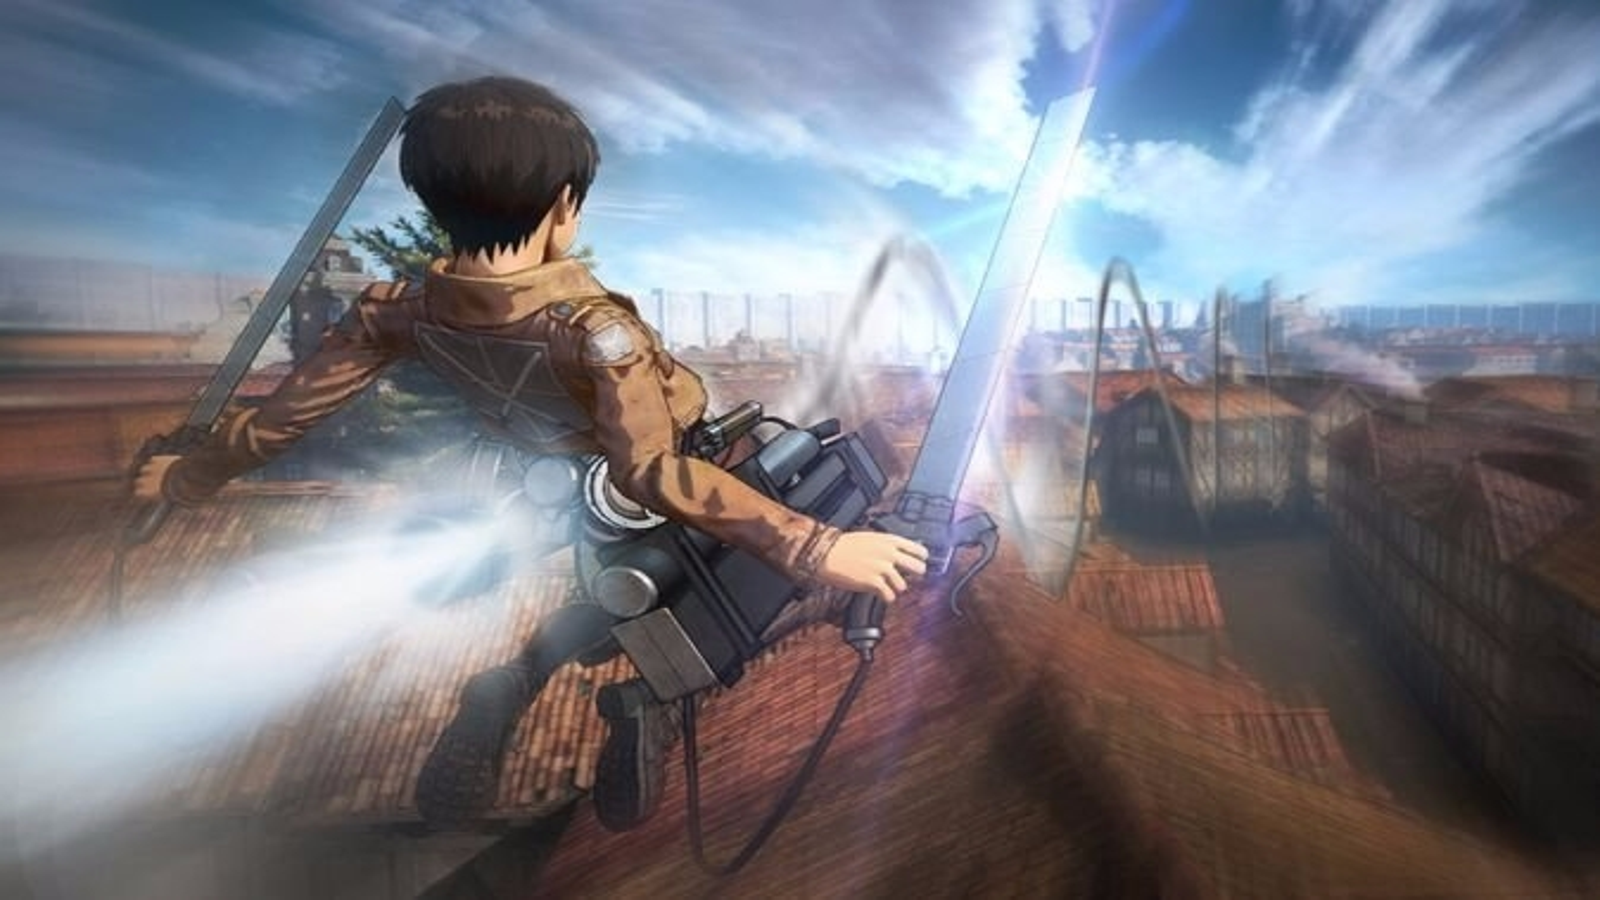 wings of freedom attack on titan wallpaper